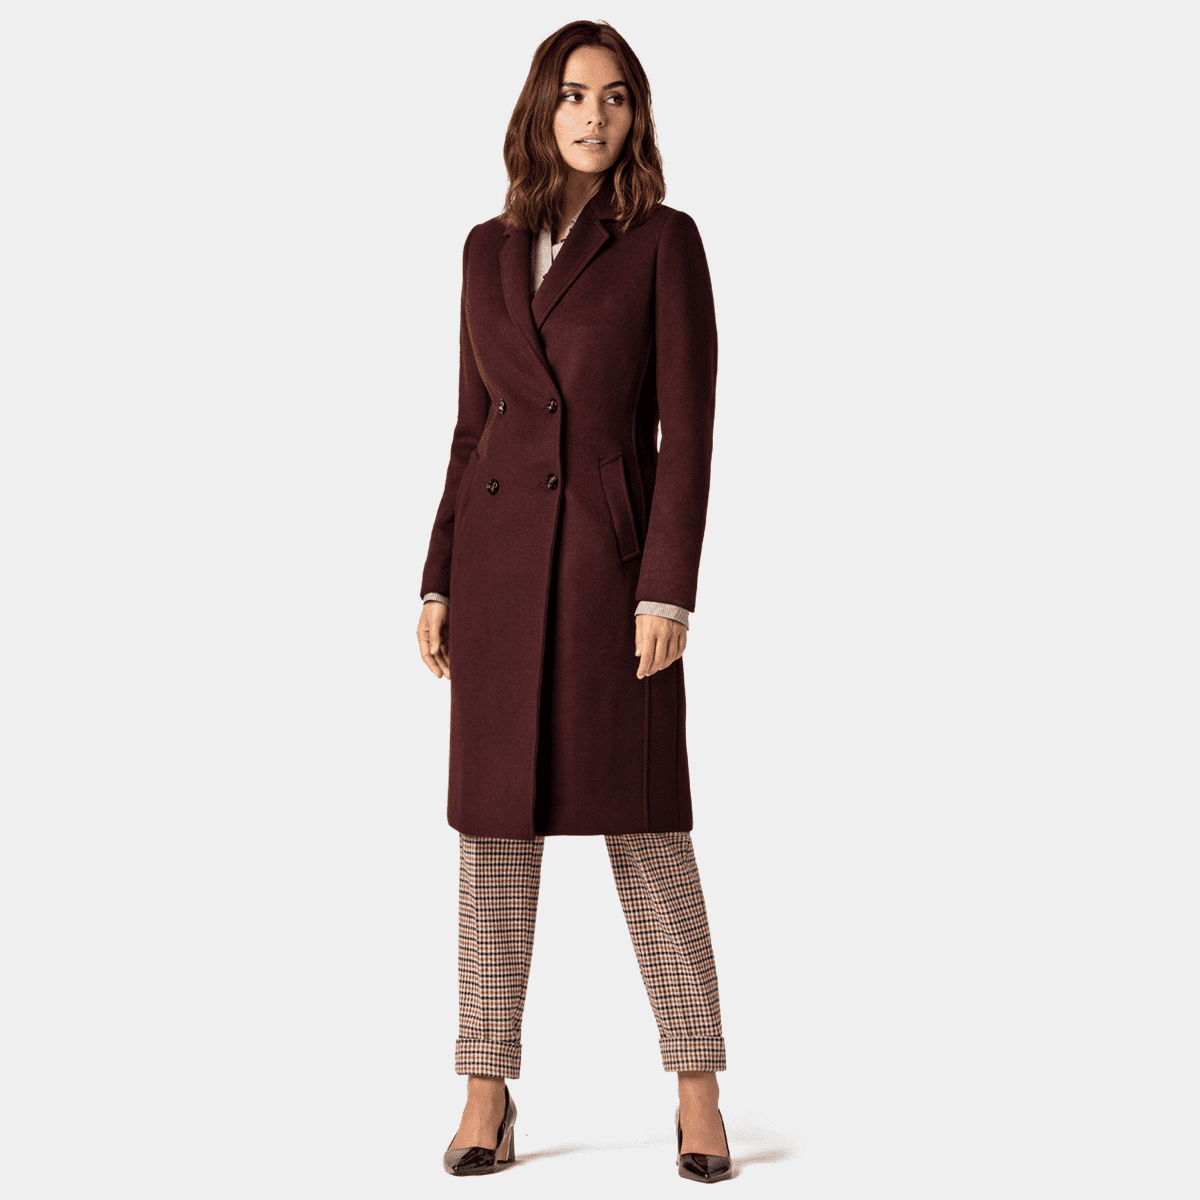 Long burgundy Double Breasted Coat with wide lapels | Sumissura